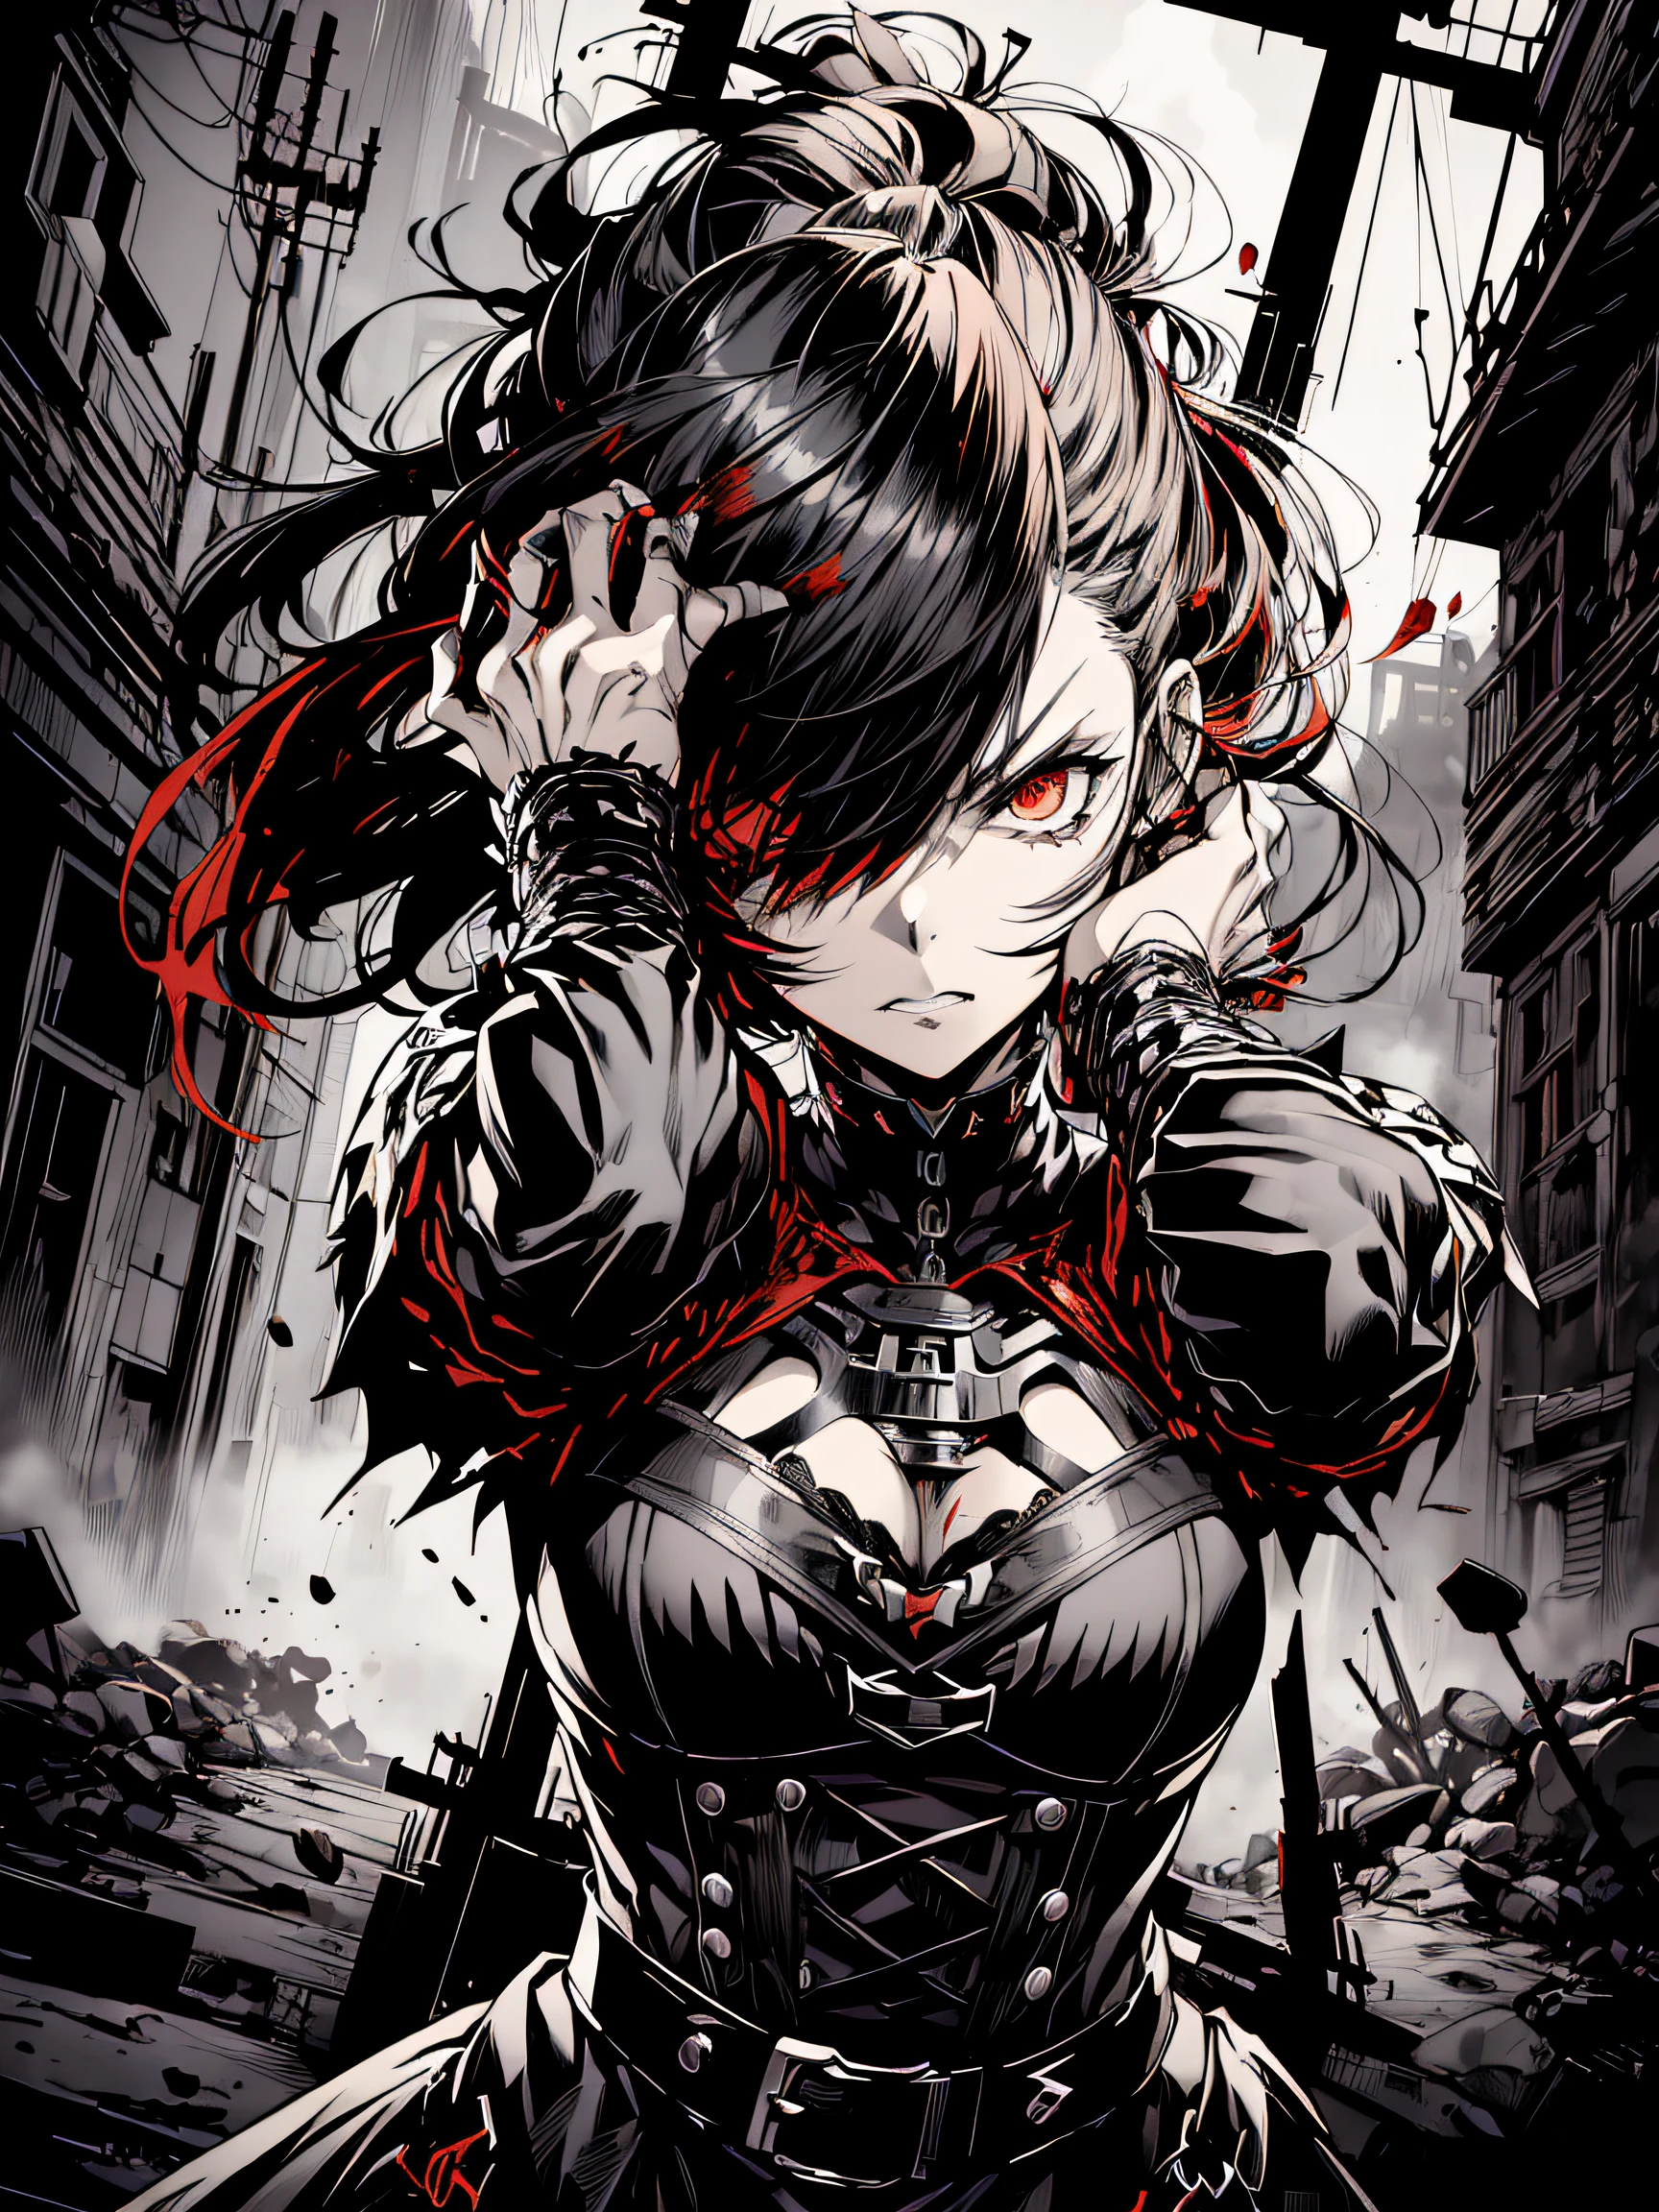 v5lcn style,(Best Quality,masutepiece:1.2),(Anime style,Comic Noir Style:1.1),dynamic compositions,actionpose,1girl in,cute-style,Adorable,extremely detailed eye,extra detailed face,very detail hair,8K,resolution,gothic dress,Gothic punk,blood splashing、dark hue、Red hue